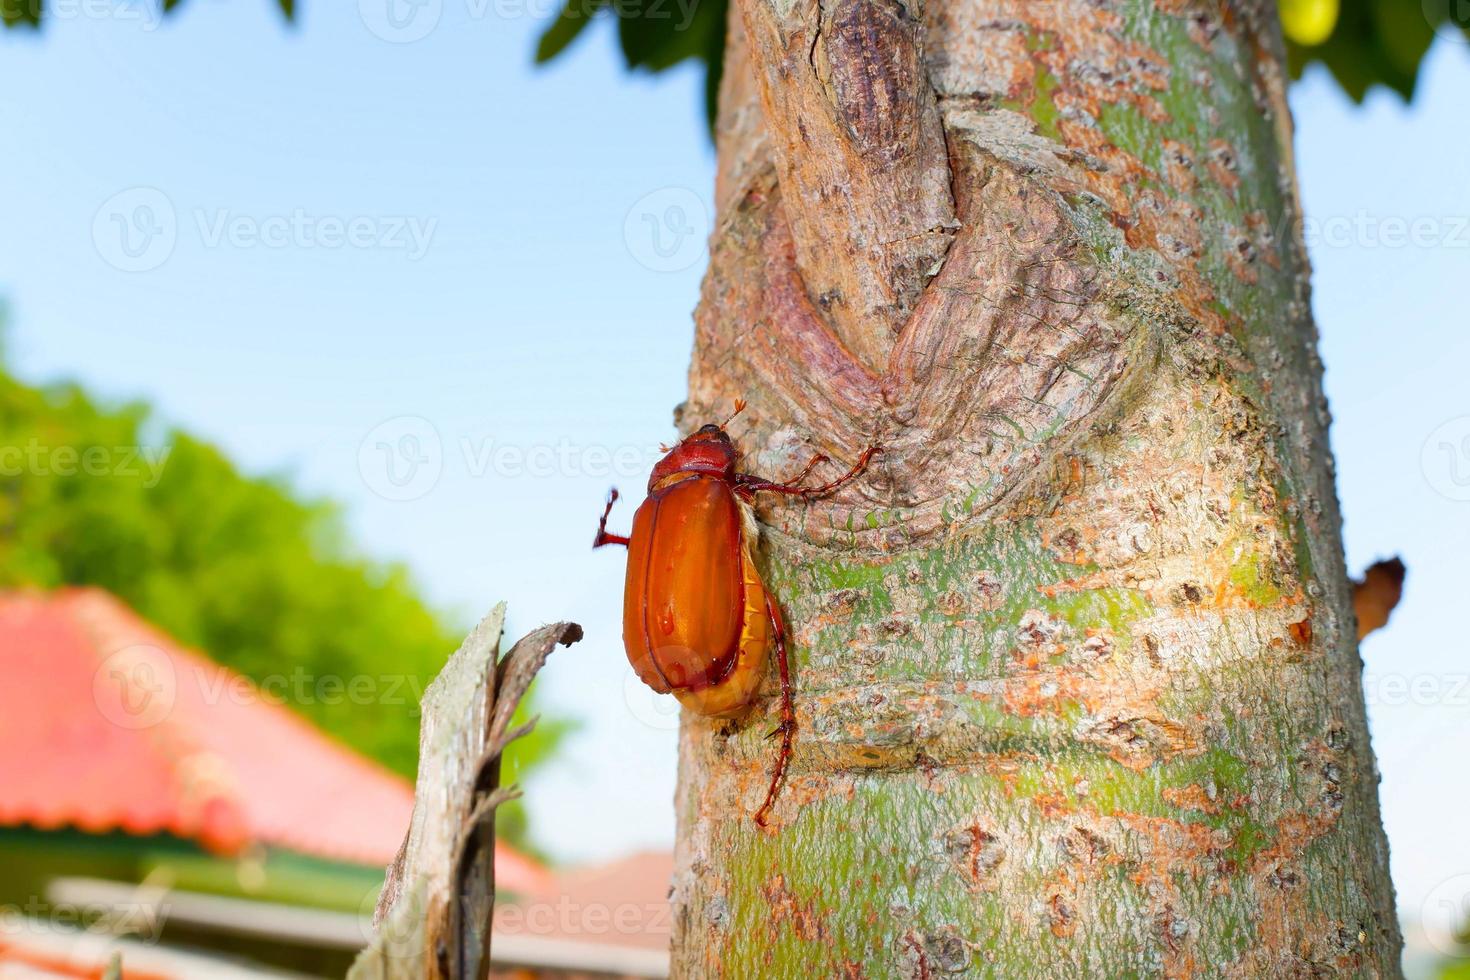 common cockchafer,Melolontha melolontha on the tree. photo